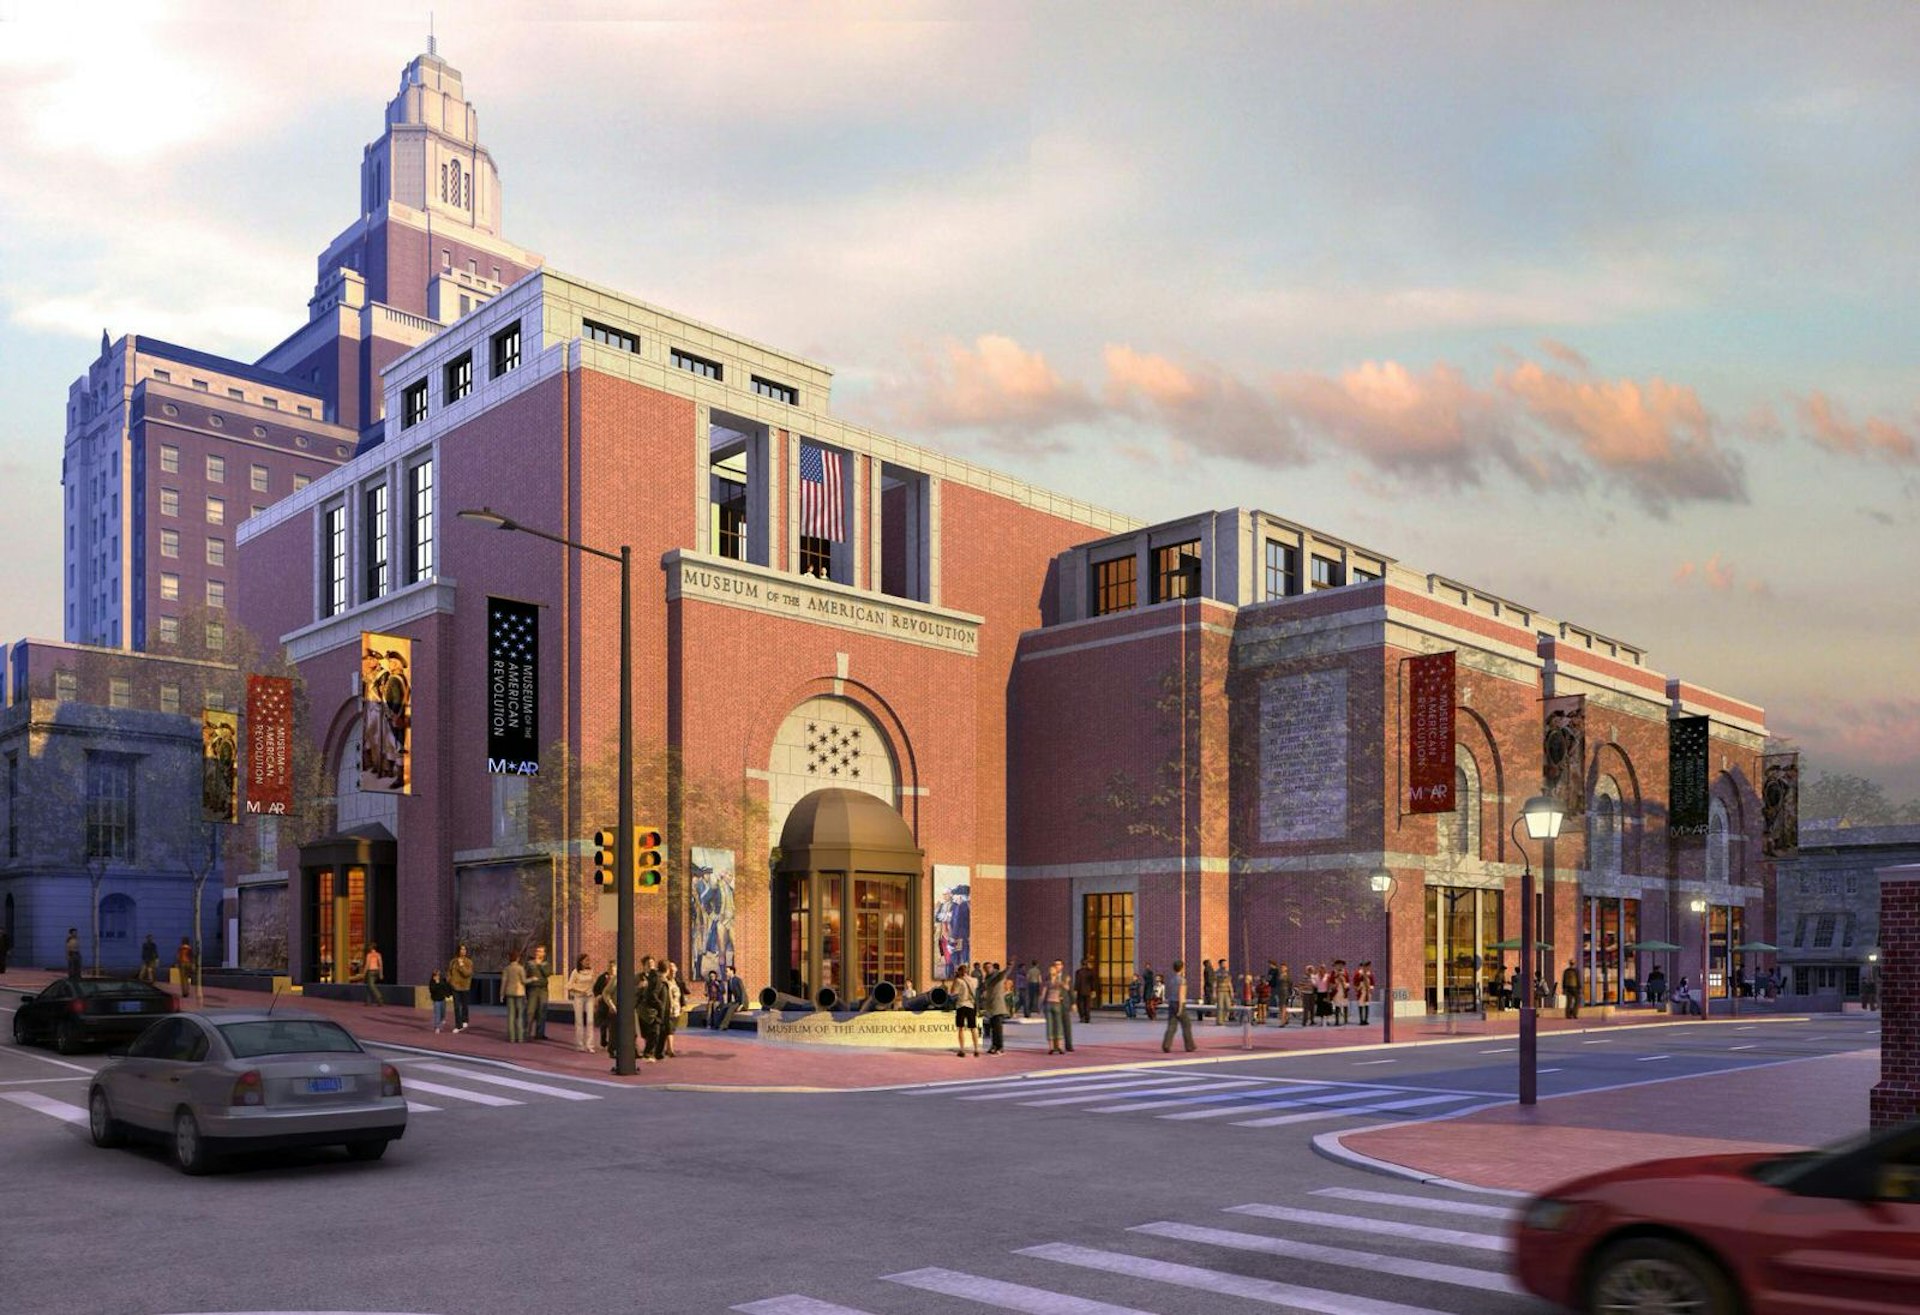 The museum will be located in a historic part of the city © Museum of the American Revolution